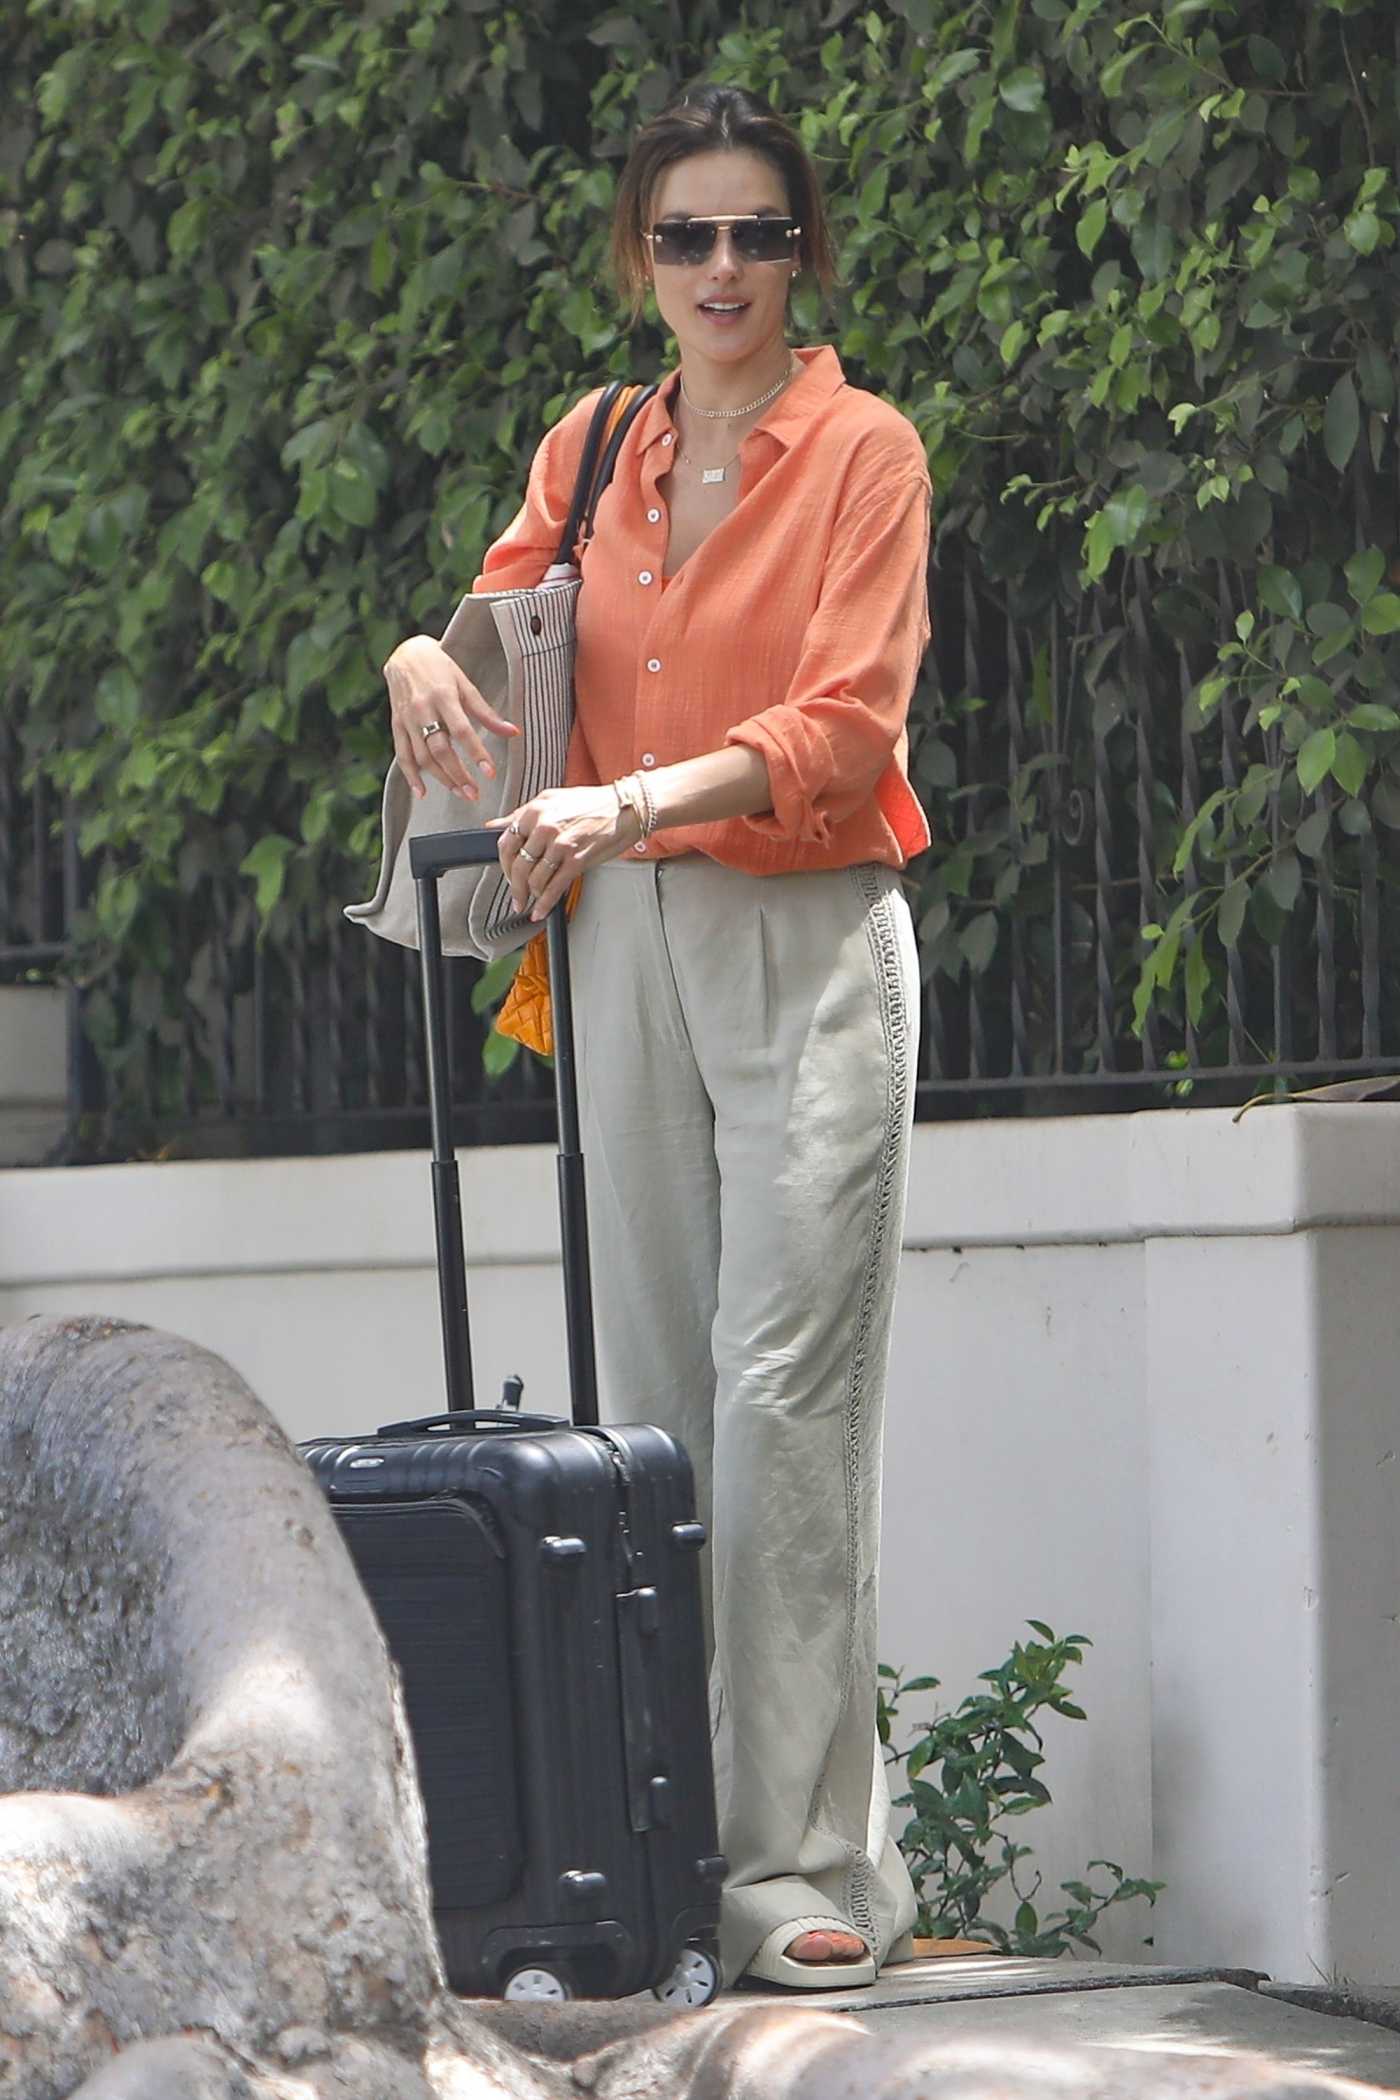 Alessandra Ambrosio in an Orange Shirt Makes Her Way to LAX Airport in Los Angeles 07/20/2022